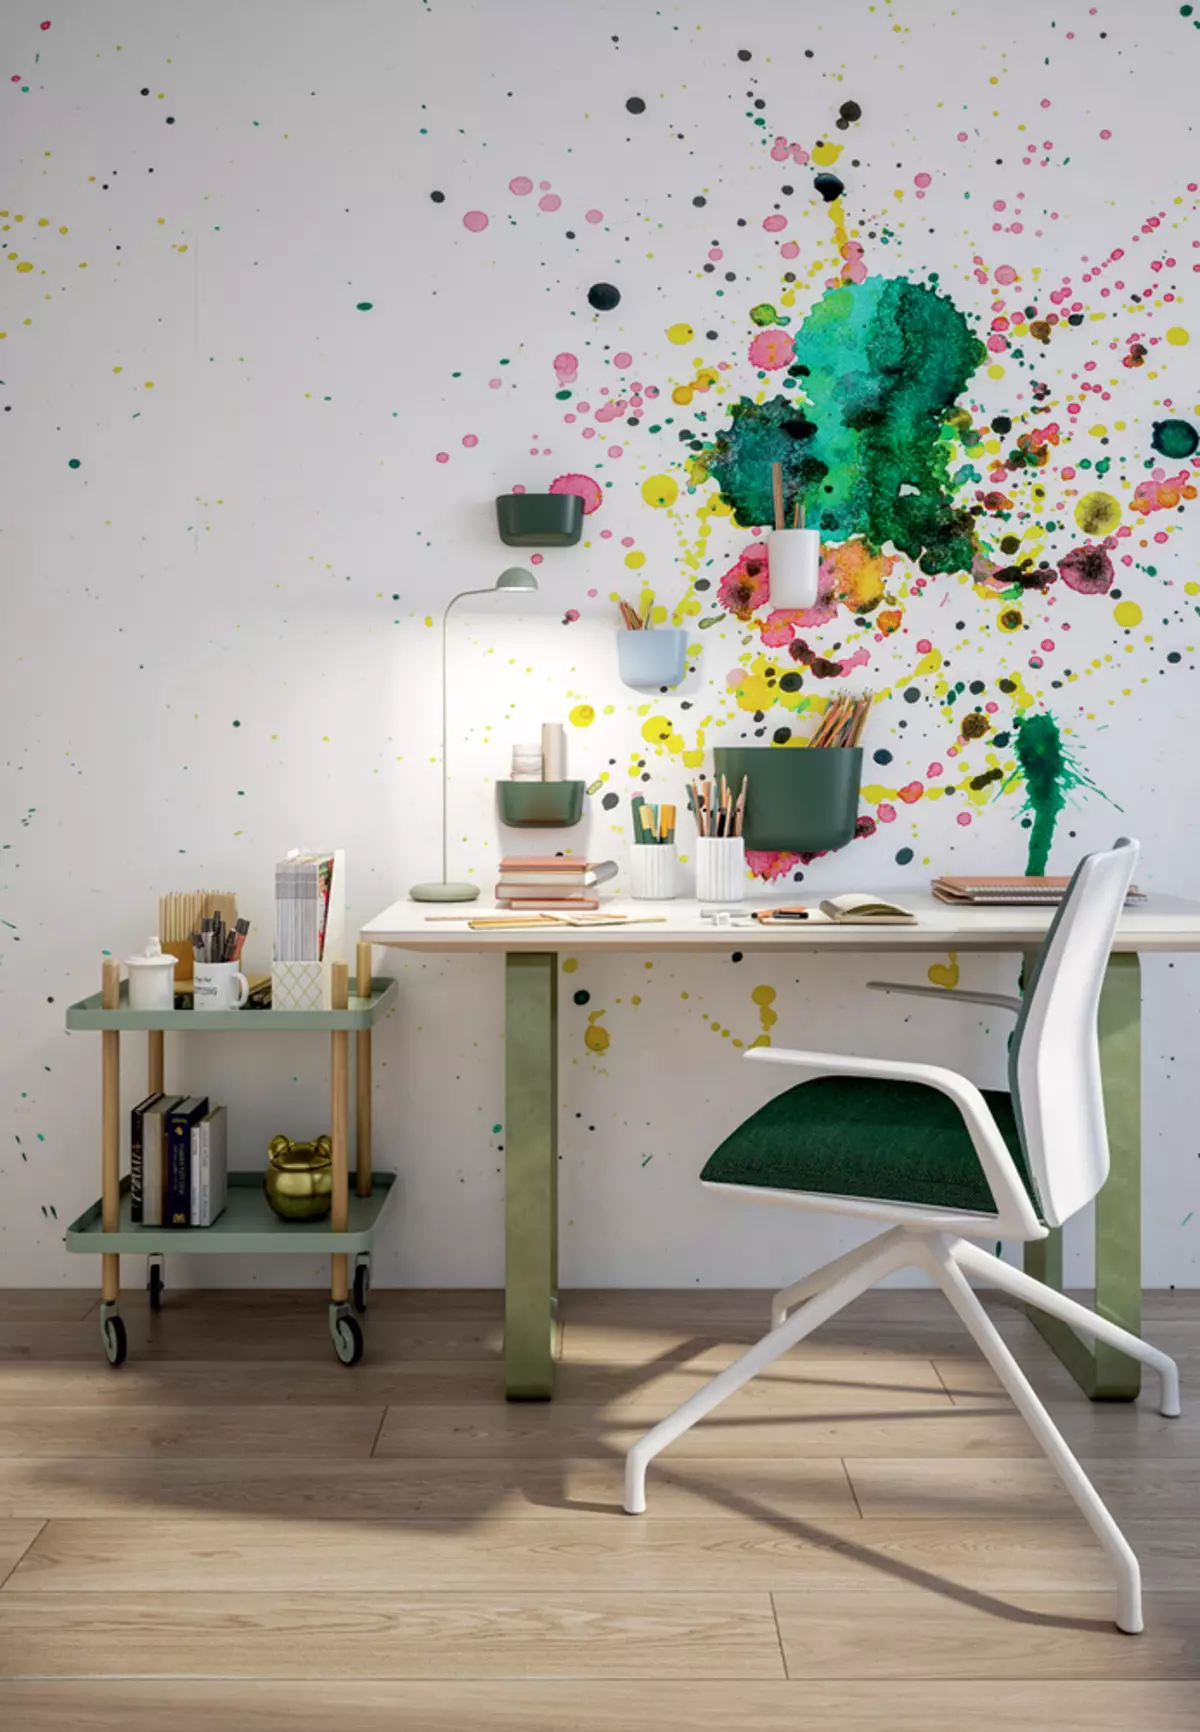 Wall mural in the interior: 16 ideas for typical apartments